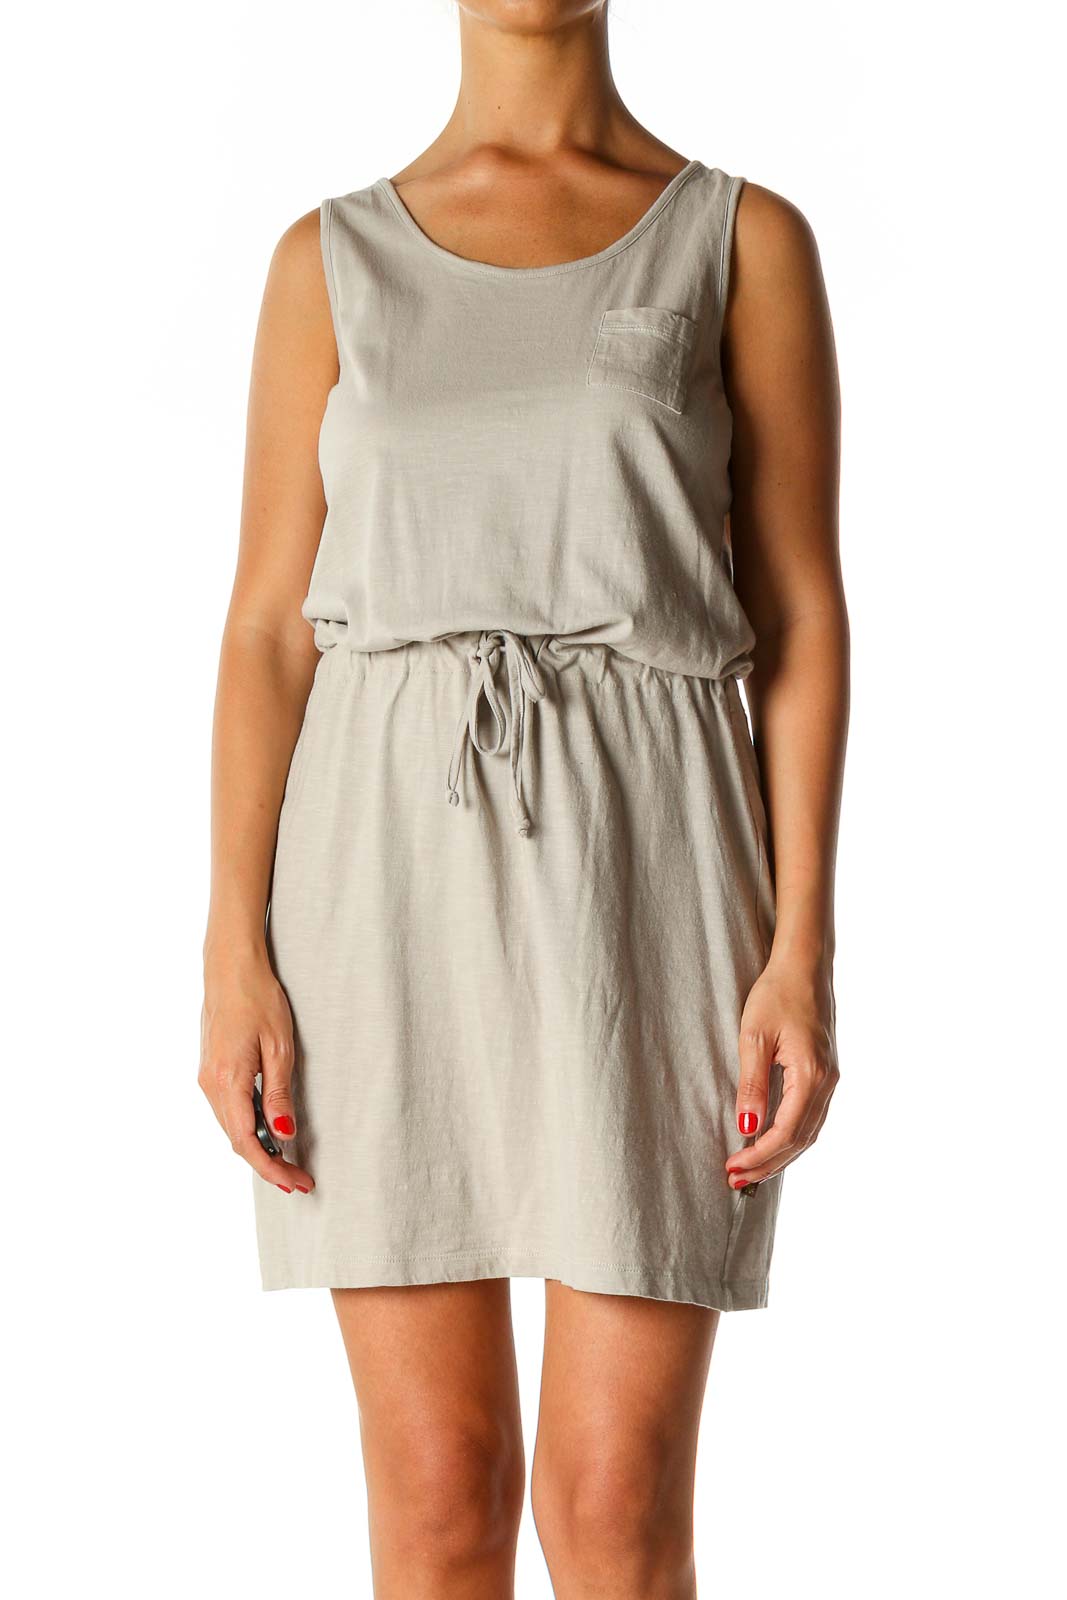 Beige Solid Casual A-Line Dress Front